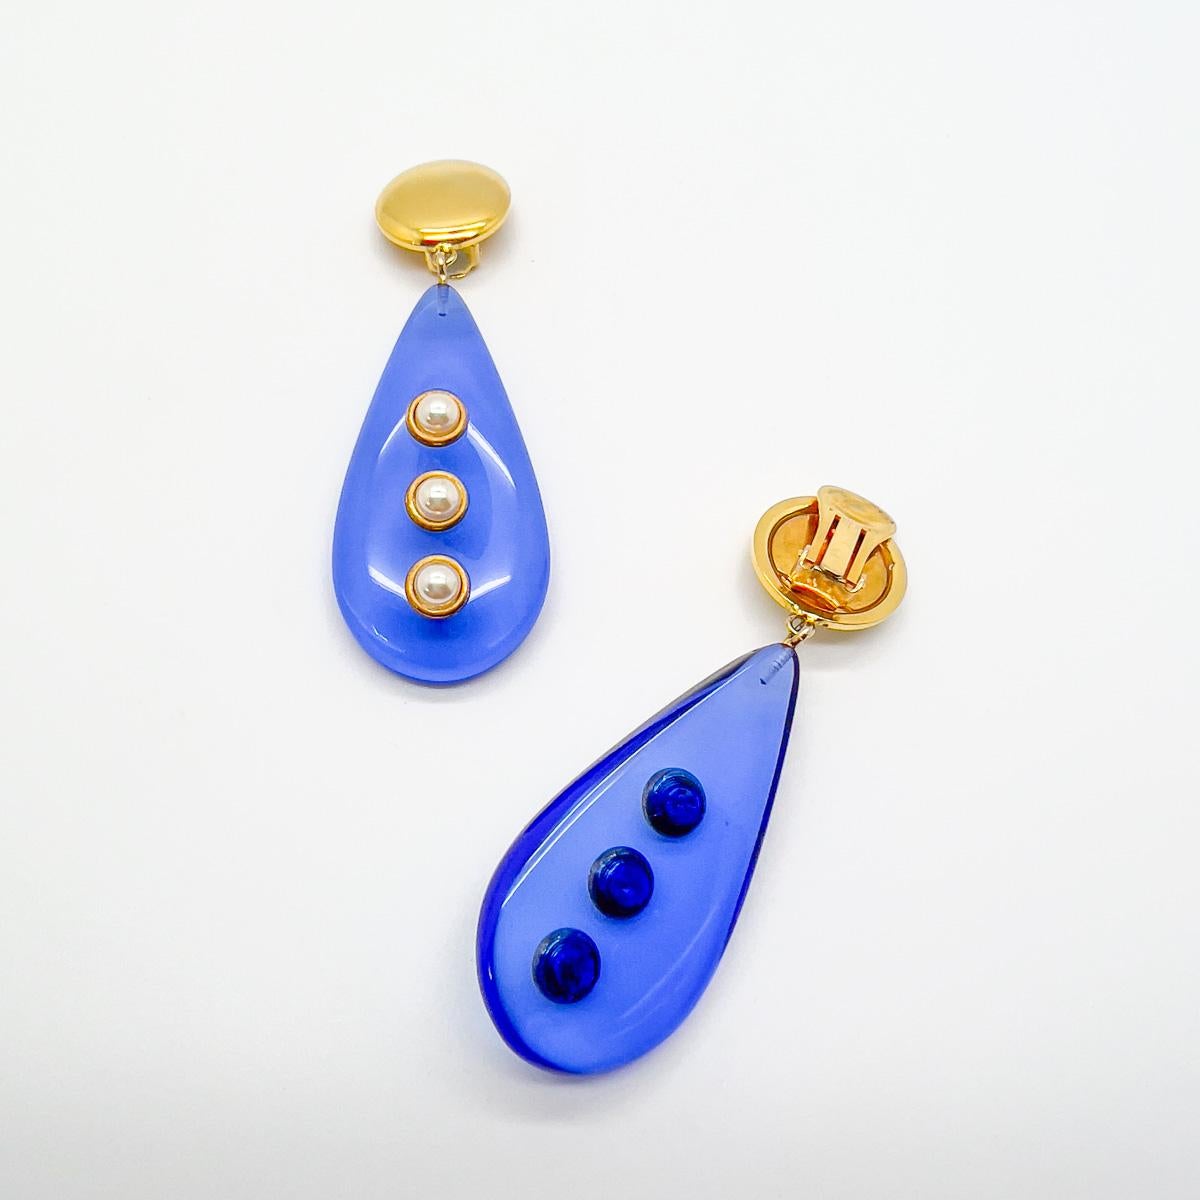 A striking pair of Vintage Vogue Bijoux Drop Earrings. Meticulously crafted the lavish blue teardrop adorned with half pearls is a breathtaking style statement from this exquisite jewel House.
The Italian jewellery brand Vogue Bijoux spans about